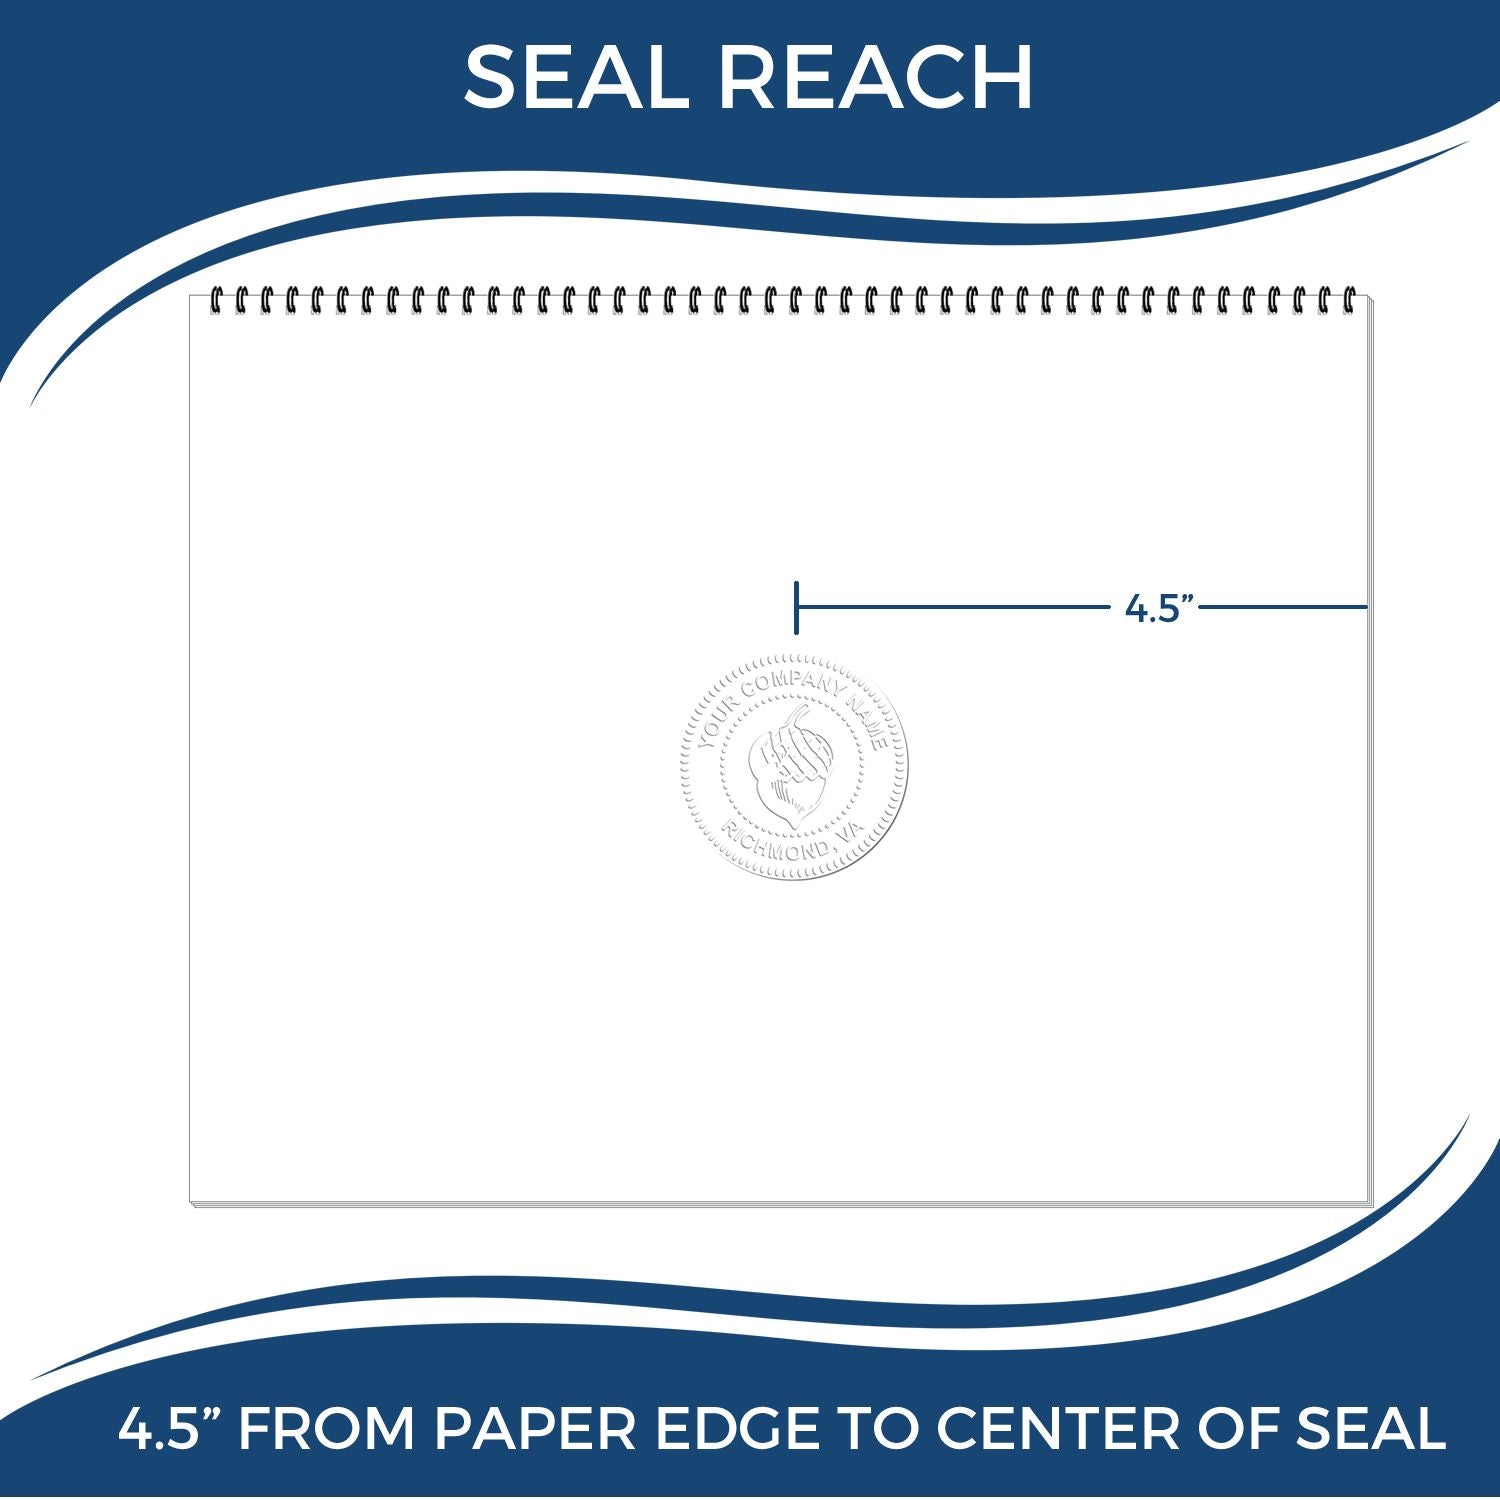 An infographic showing the seal reach which is represented by a ruler and a miniature seal image of the State of Hawaii Extended Long Reach Geologist Seal